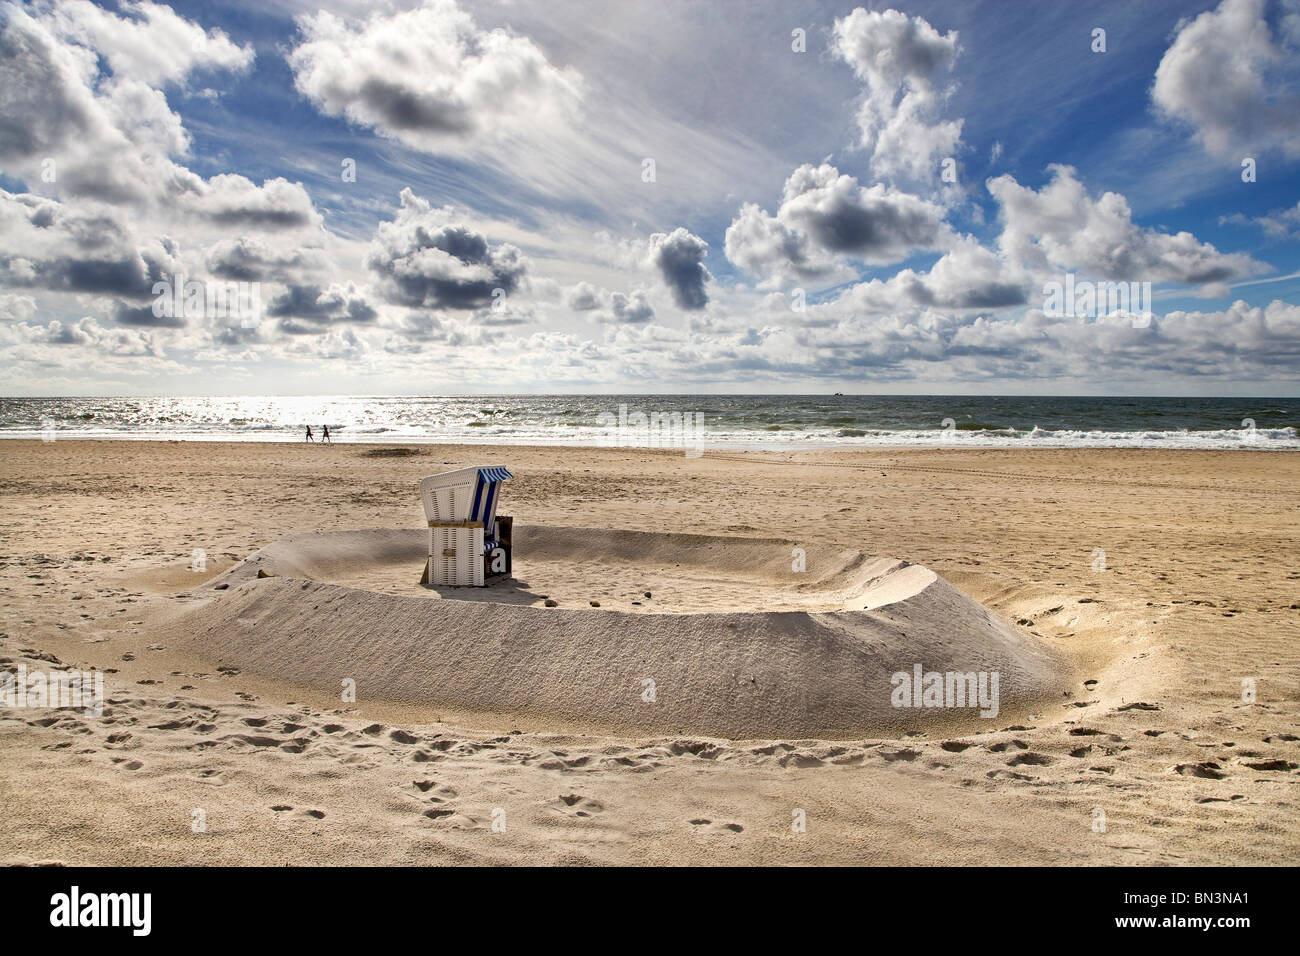 Hooded Beach Chair on the beach in Kampen, Sylt, Germany, elevated view Stock Photo